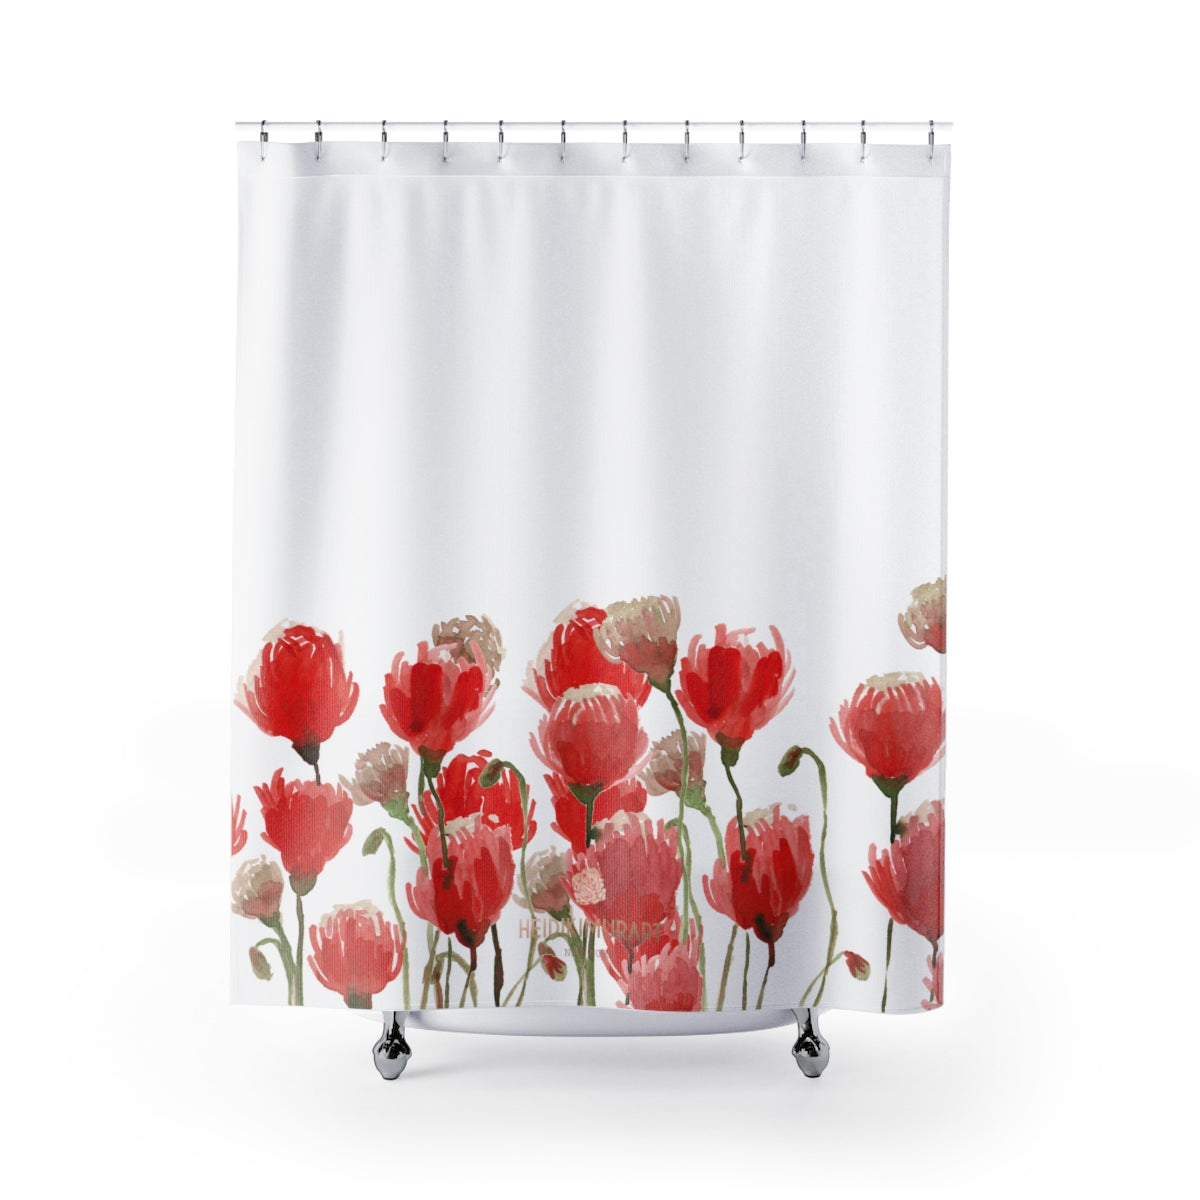 White Red Poppy Flower Floral Print Designer Polyester Shower Curtains- Made in USA-Shower Curtain-71" x 74"-Heidi Kimura Art LLC White and Red Poppy Flower Floral Print Designer Polyester Shower Curtains- Printed in USA, Premium Bathroom Shower Curtains Home Decor Large 100% Polyester 71x74 inches  